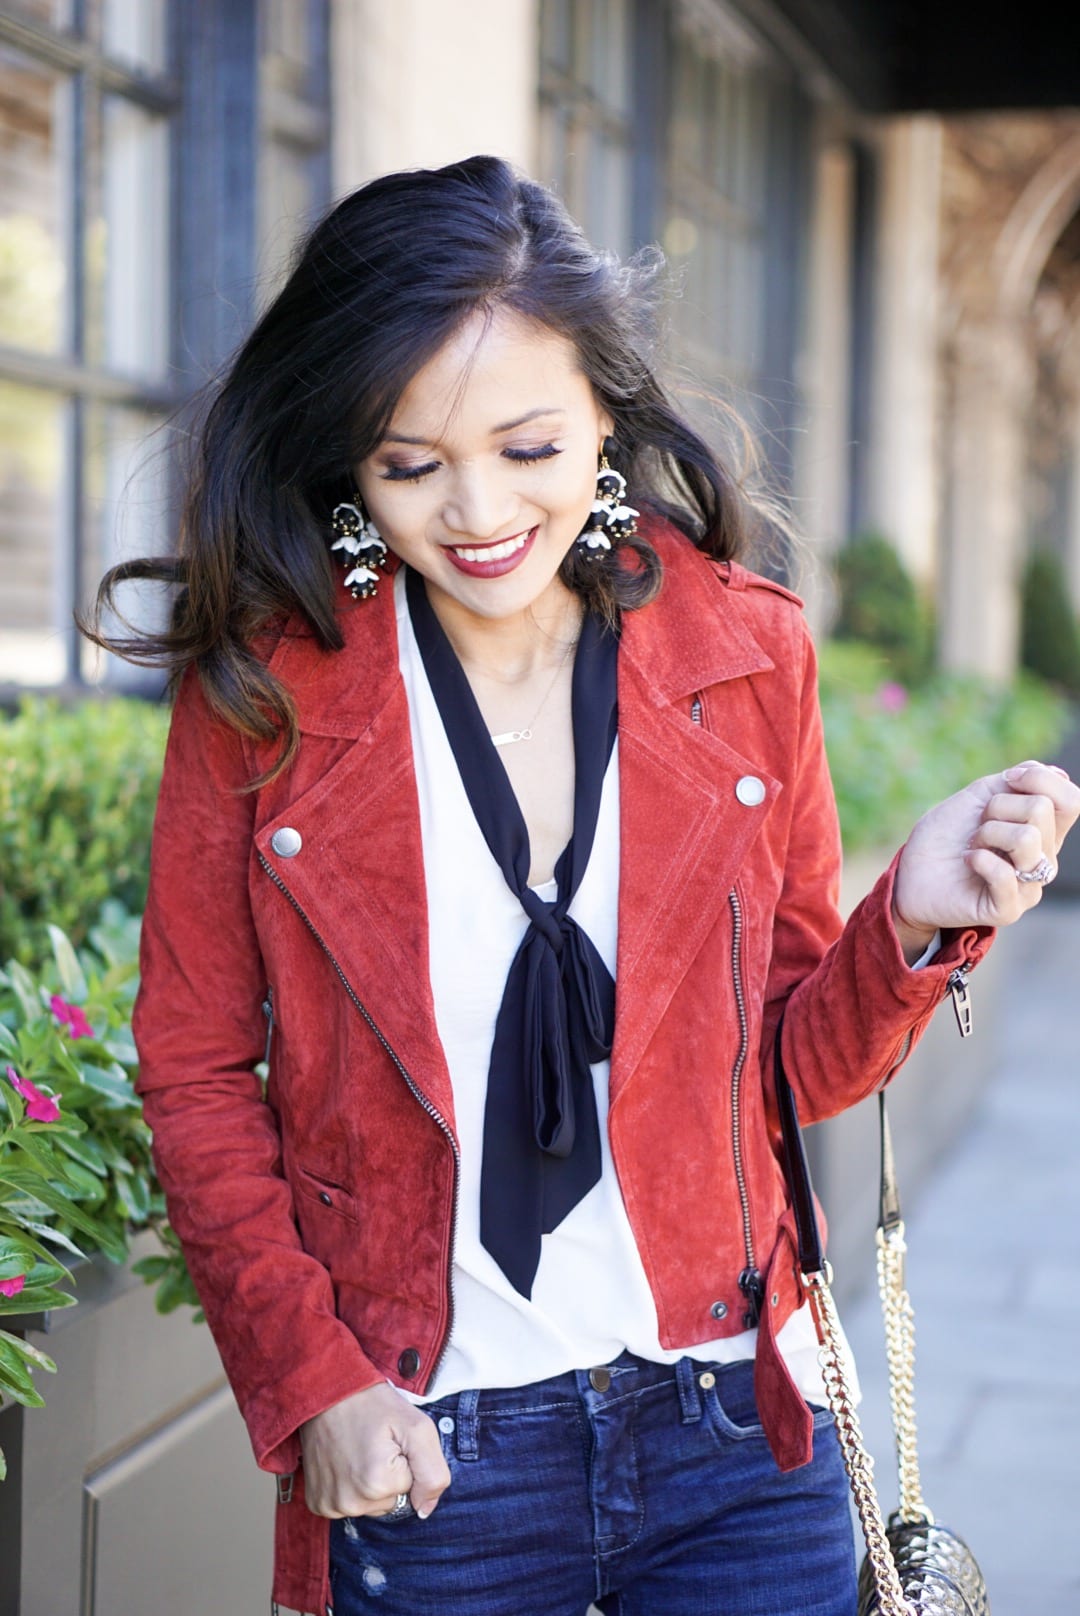 ZAPPOS, blank NYC, blank NYC denim, BLANK NYC MOTO JACKET, SUEDE JACKET, RED JACKET, HOLIDAY OUTFIT, CHRISTMAS OUTFIT, URBANATTITUDE, BAUBLE BAR STATEMENT EARRINGS, REBECCA MINKOFF CROSSBODY BAG, RED BOTTOMS, CHRISTIAN LOUBOUTIN HEELS, BLACK HEELS , TIE FRONT TOP 